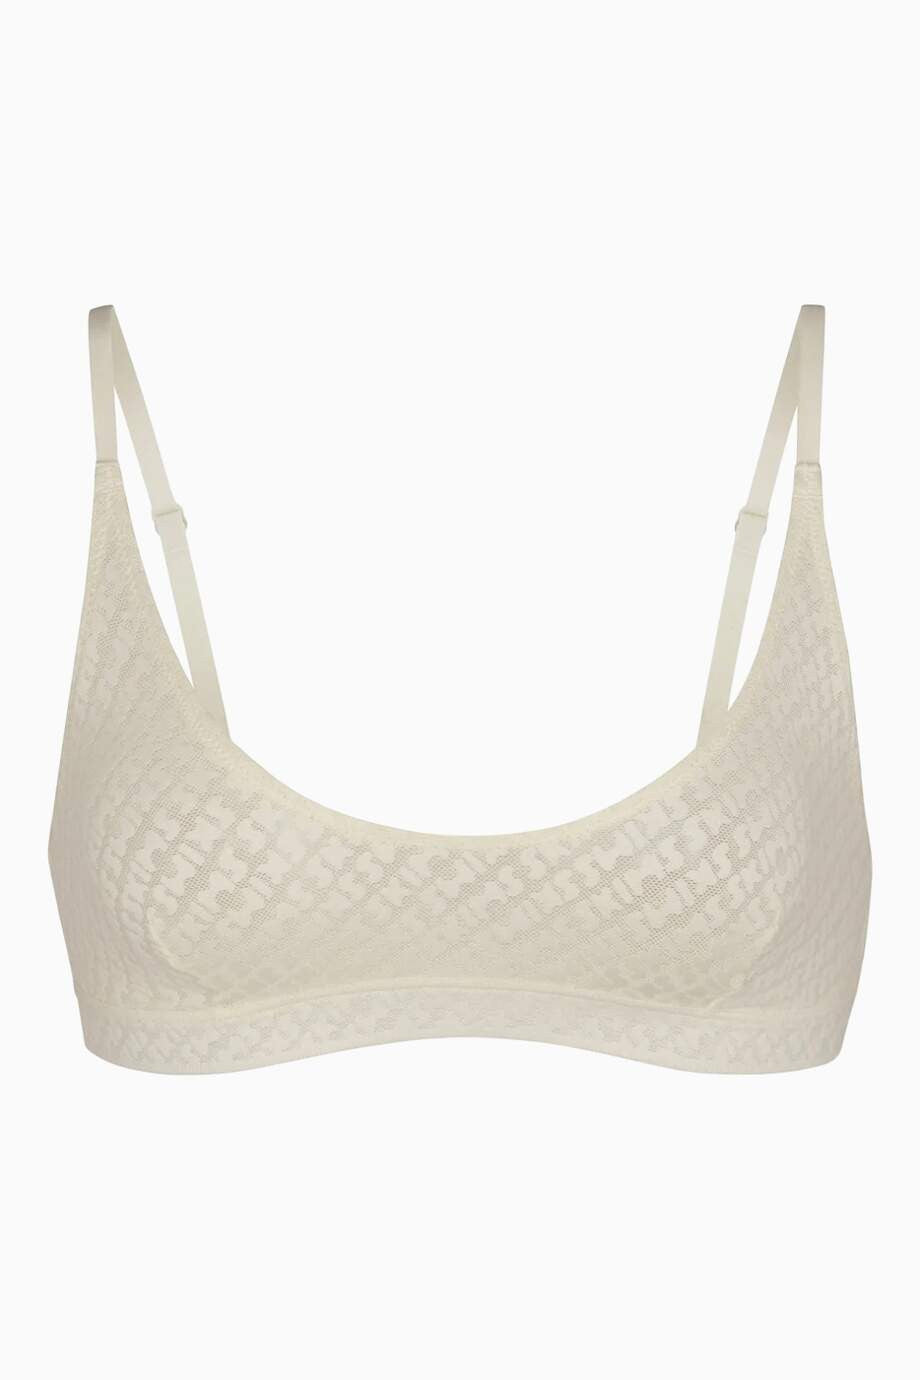 SKIMS - Fits Everybody scooped stretch-woven bra